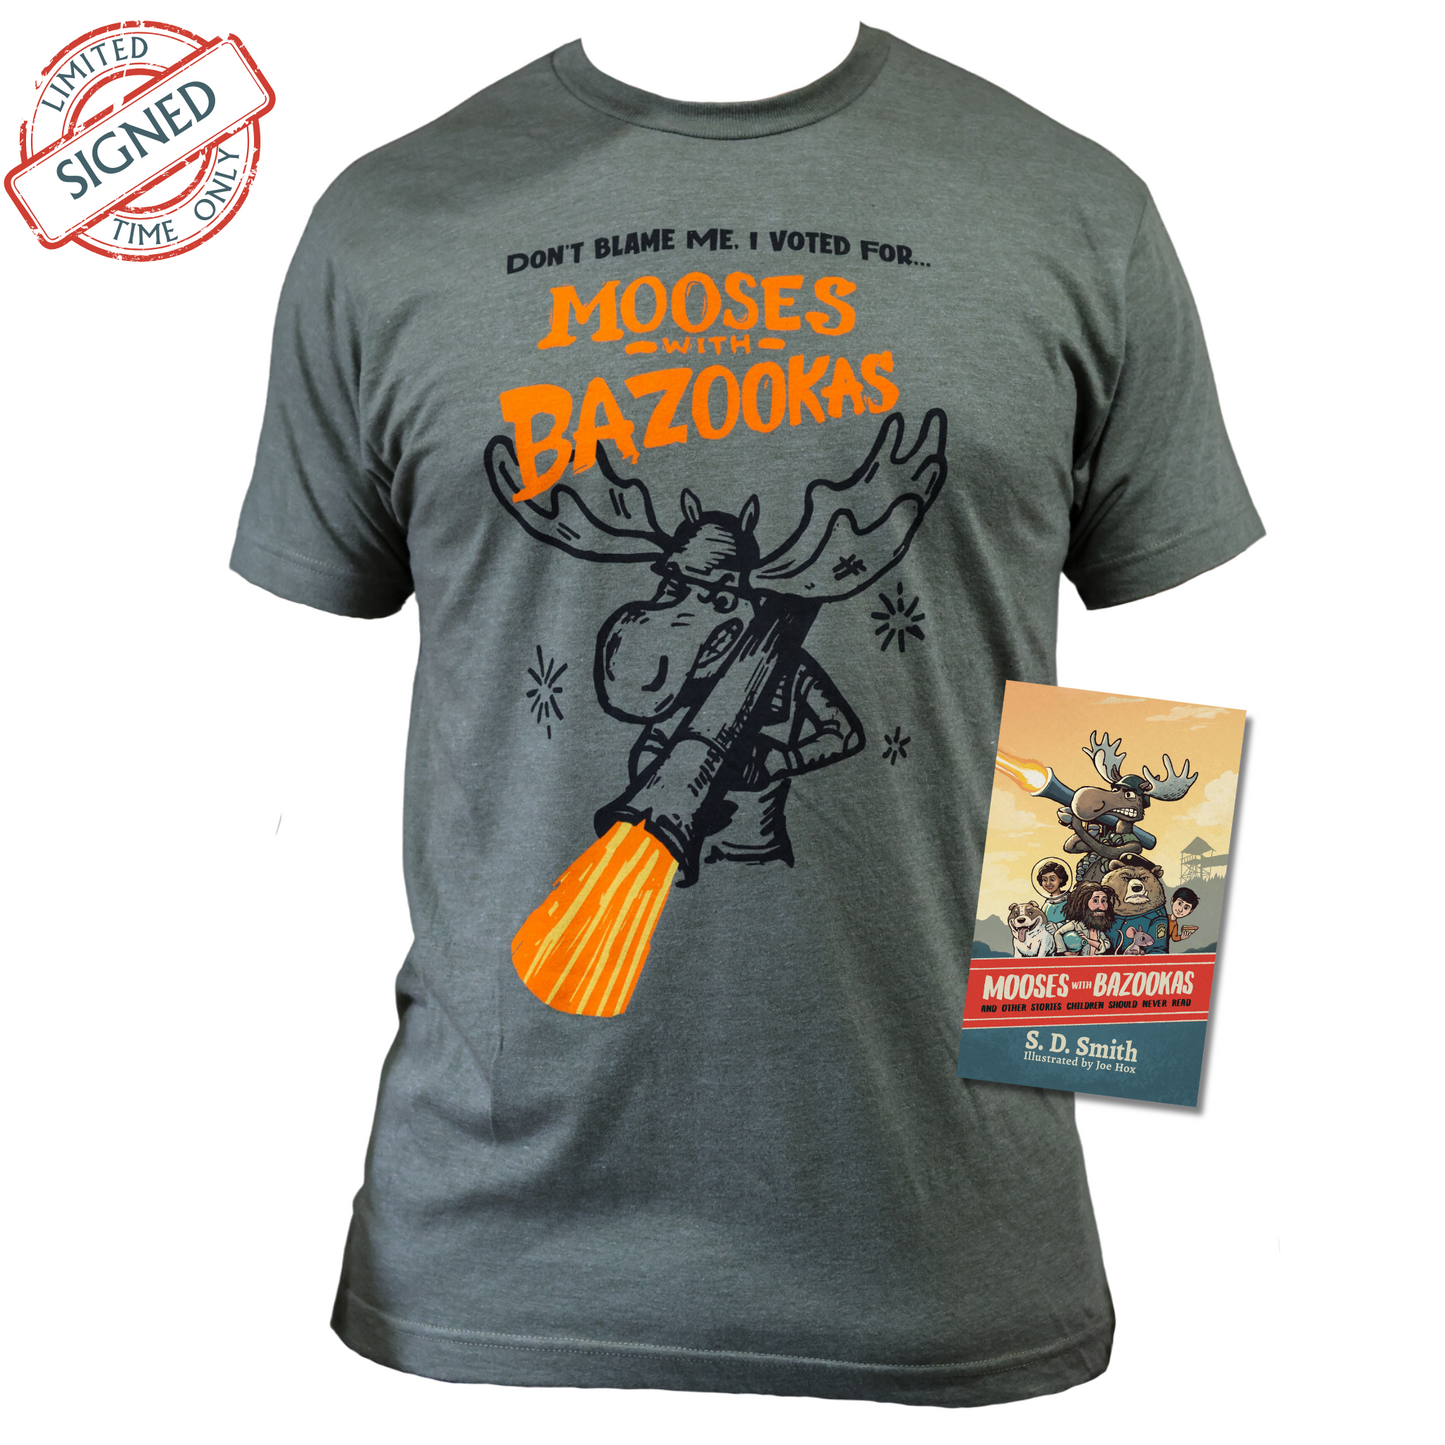 Mooses with Bazookas T-shirt + SIGNED Book